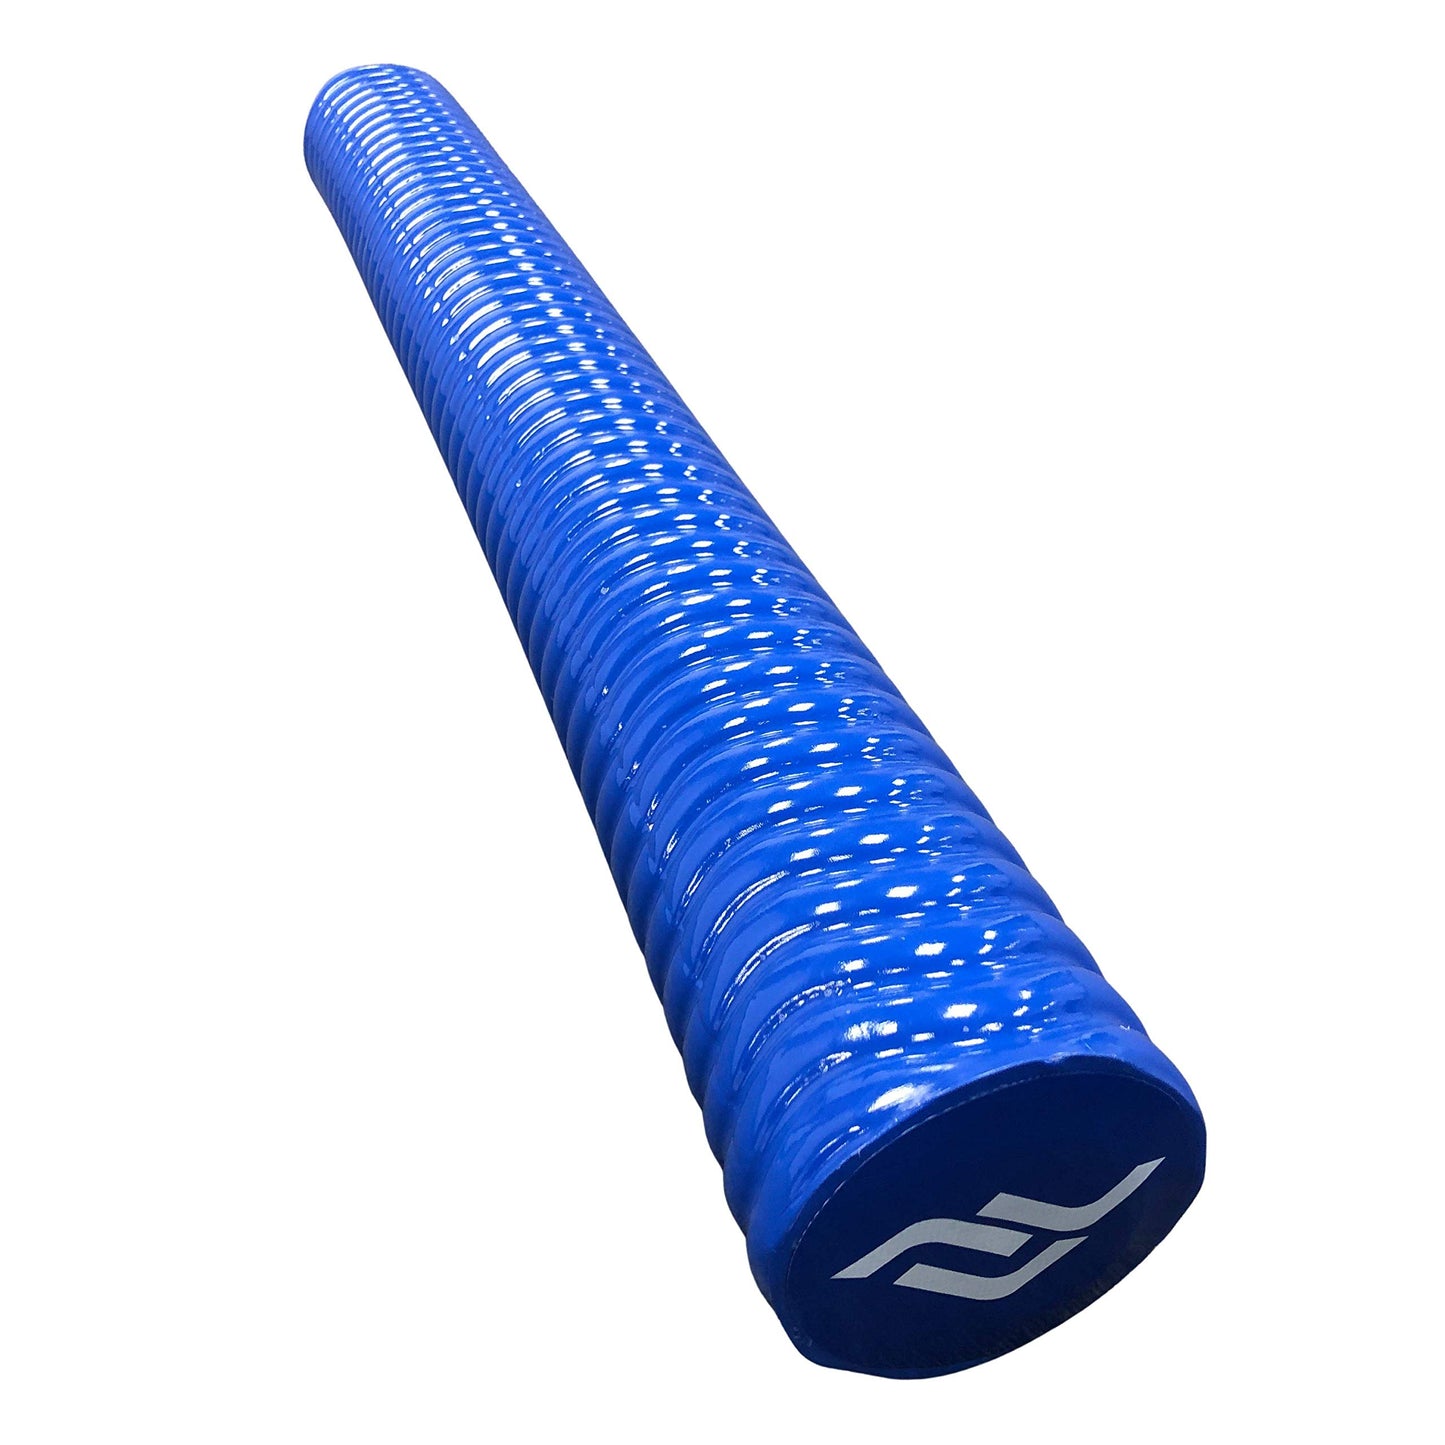 IMMERSA Jumbo Swimming Pool Noodles, Premium Water-Based Vinyl Coating and UV Resistant Soft Foam Noodles for Swimming and Floating, Lake Floats, Pool Floats for Adults and Kids. Dark Blue